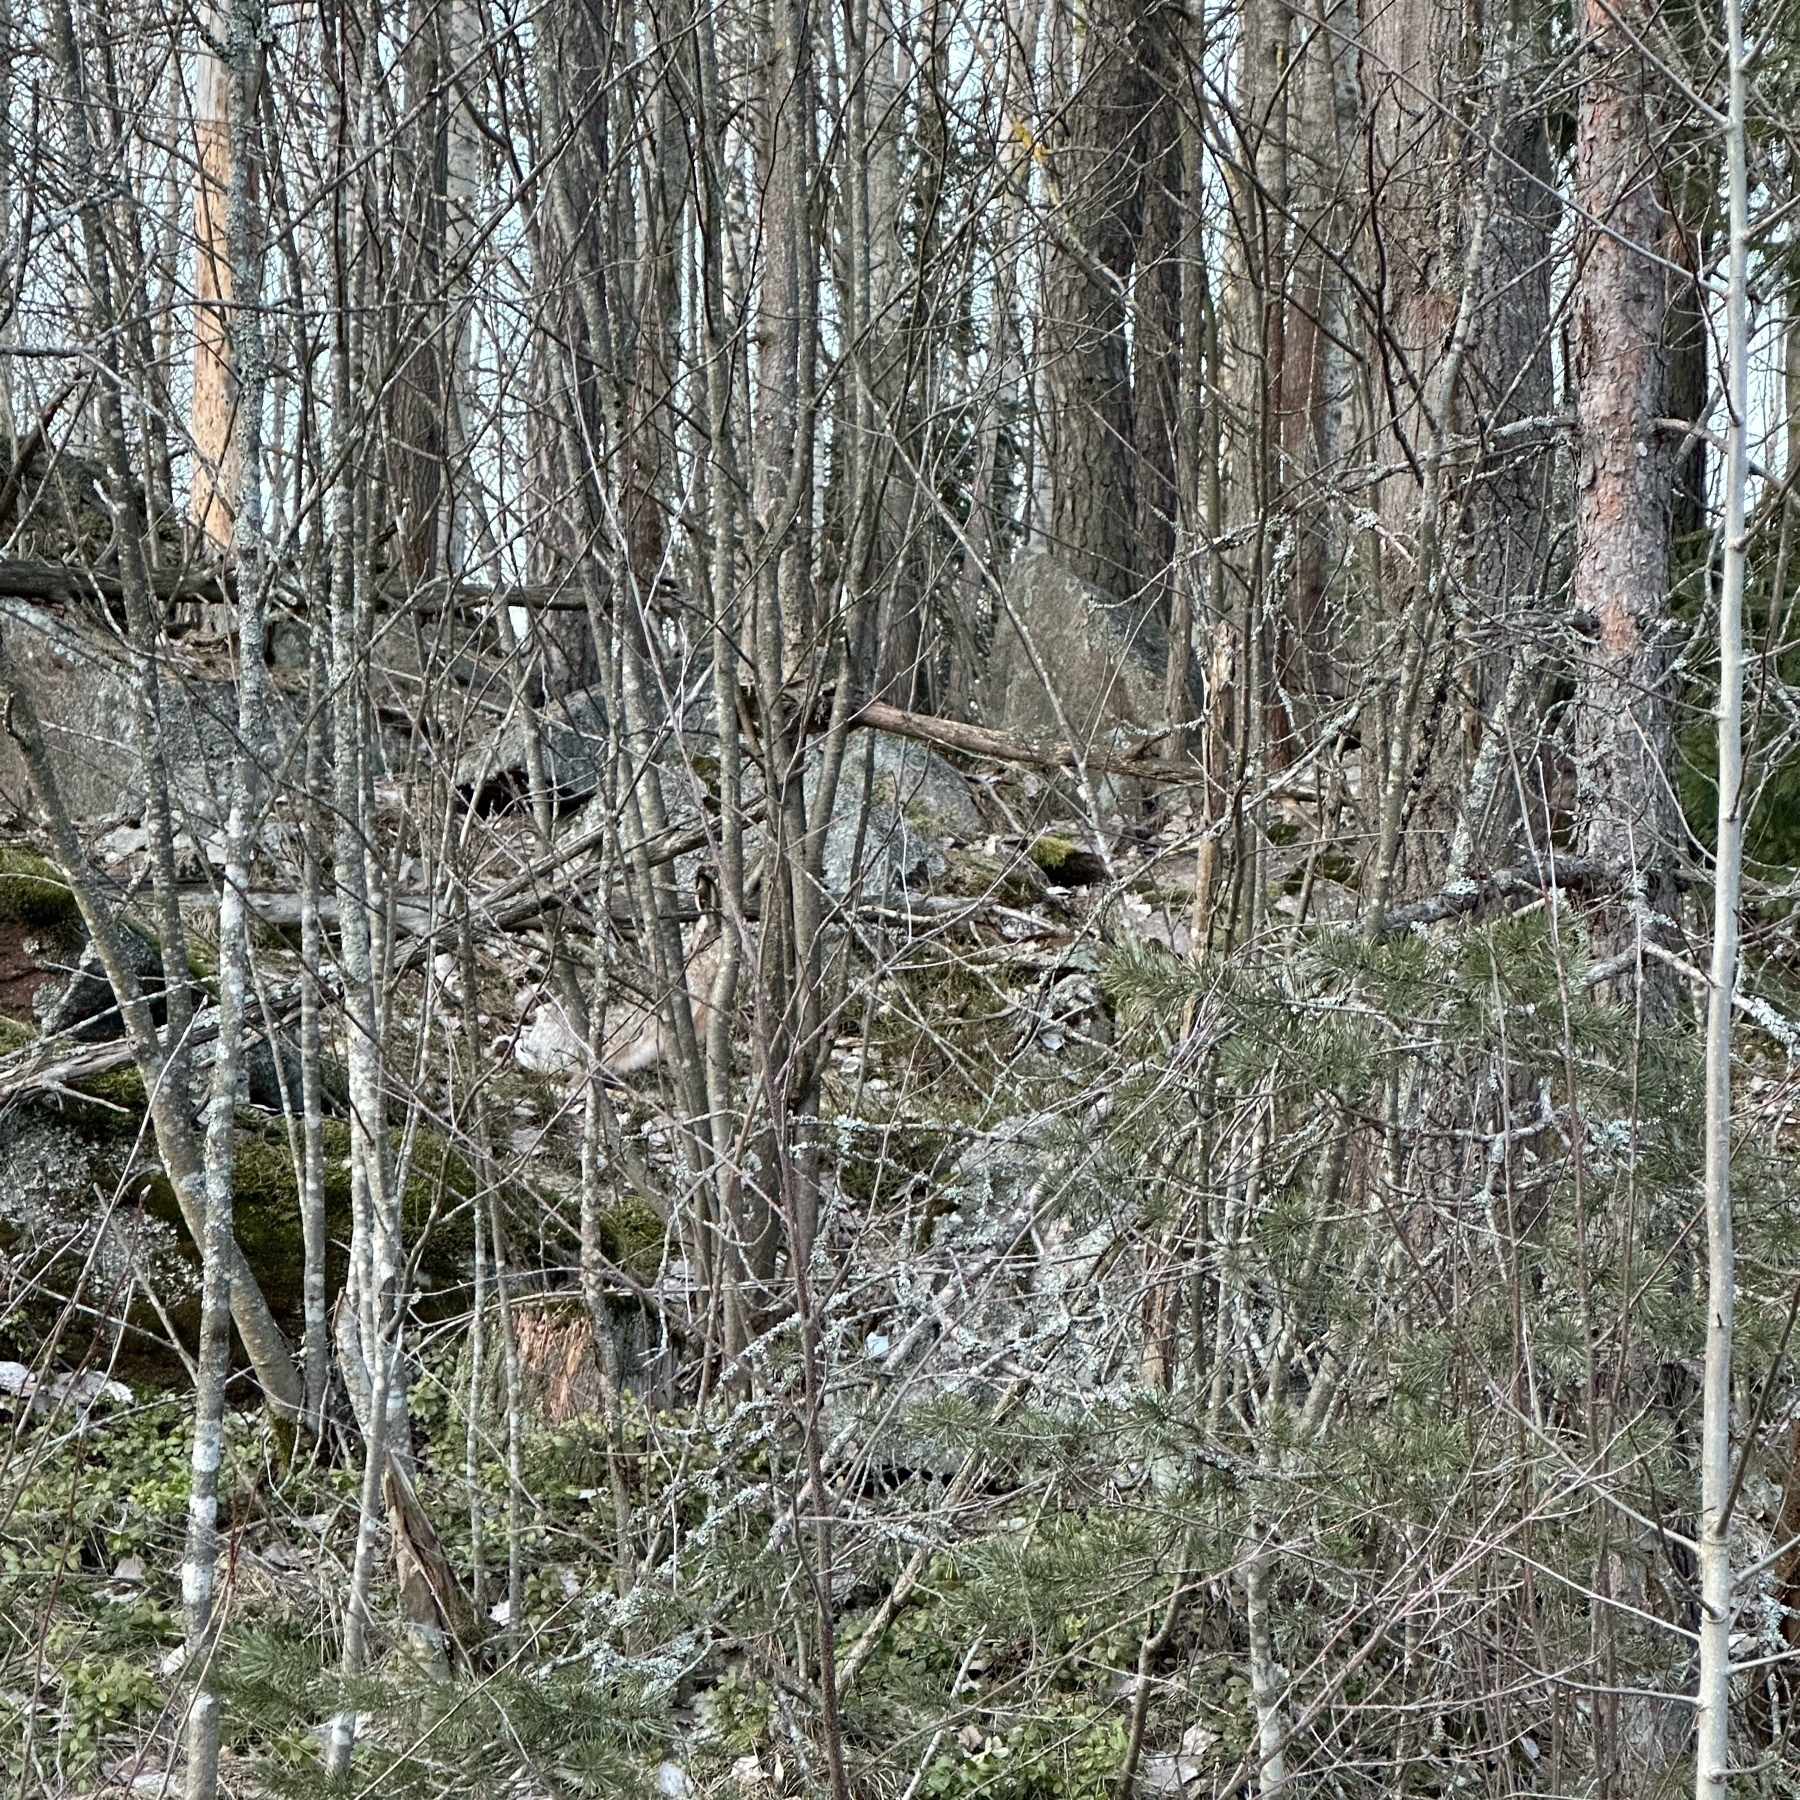 hare hiding in under brush between small trees and rocks. Barely noticeable